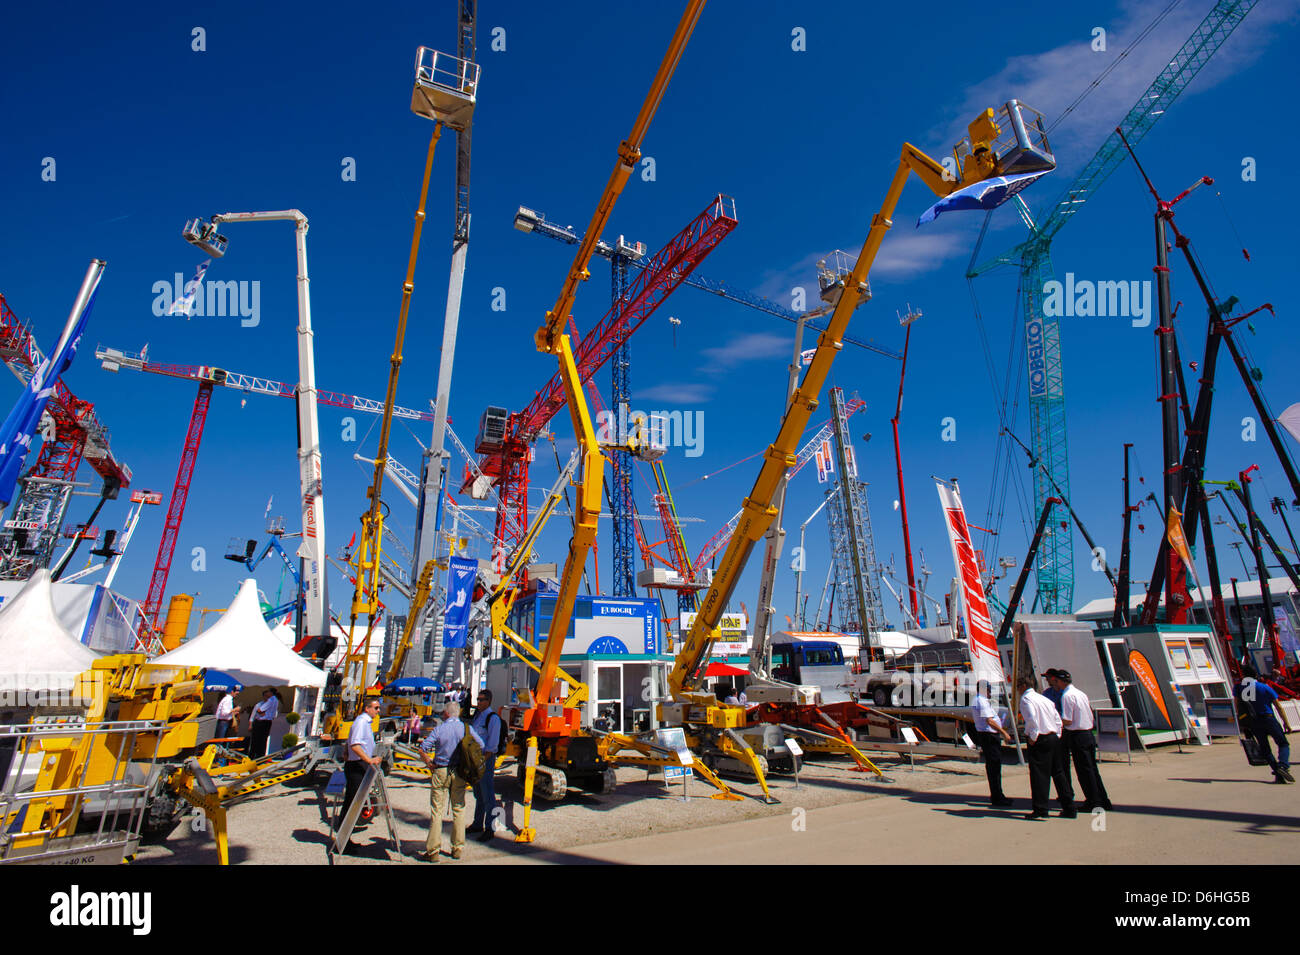 the world biggest trade fair for building machines, titled BAUMA 2013, takes place from 15.-21. April 2013 in Munich, Germany Stock Photo